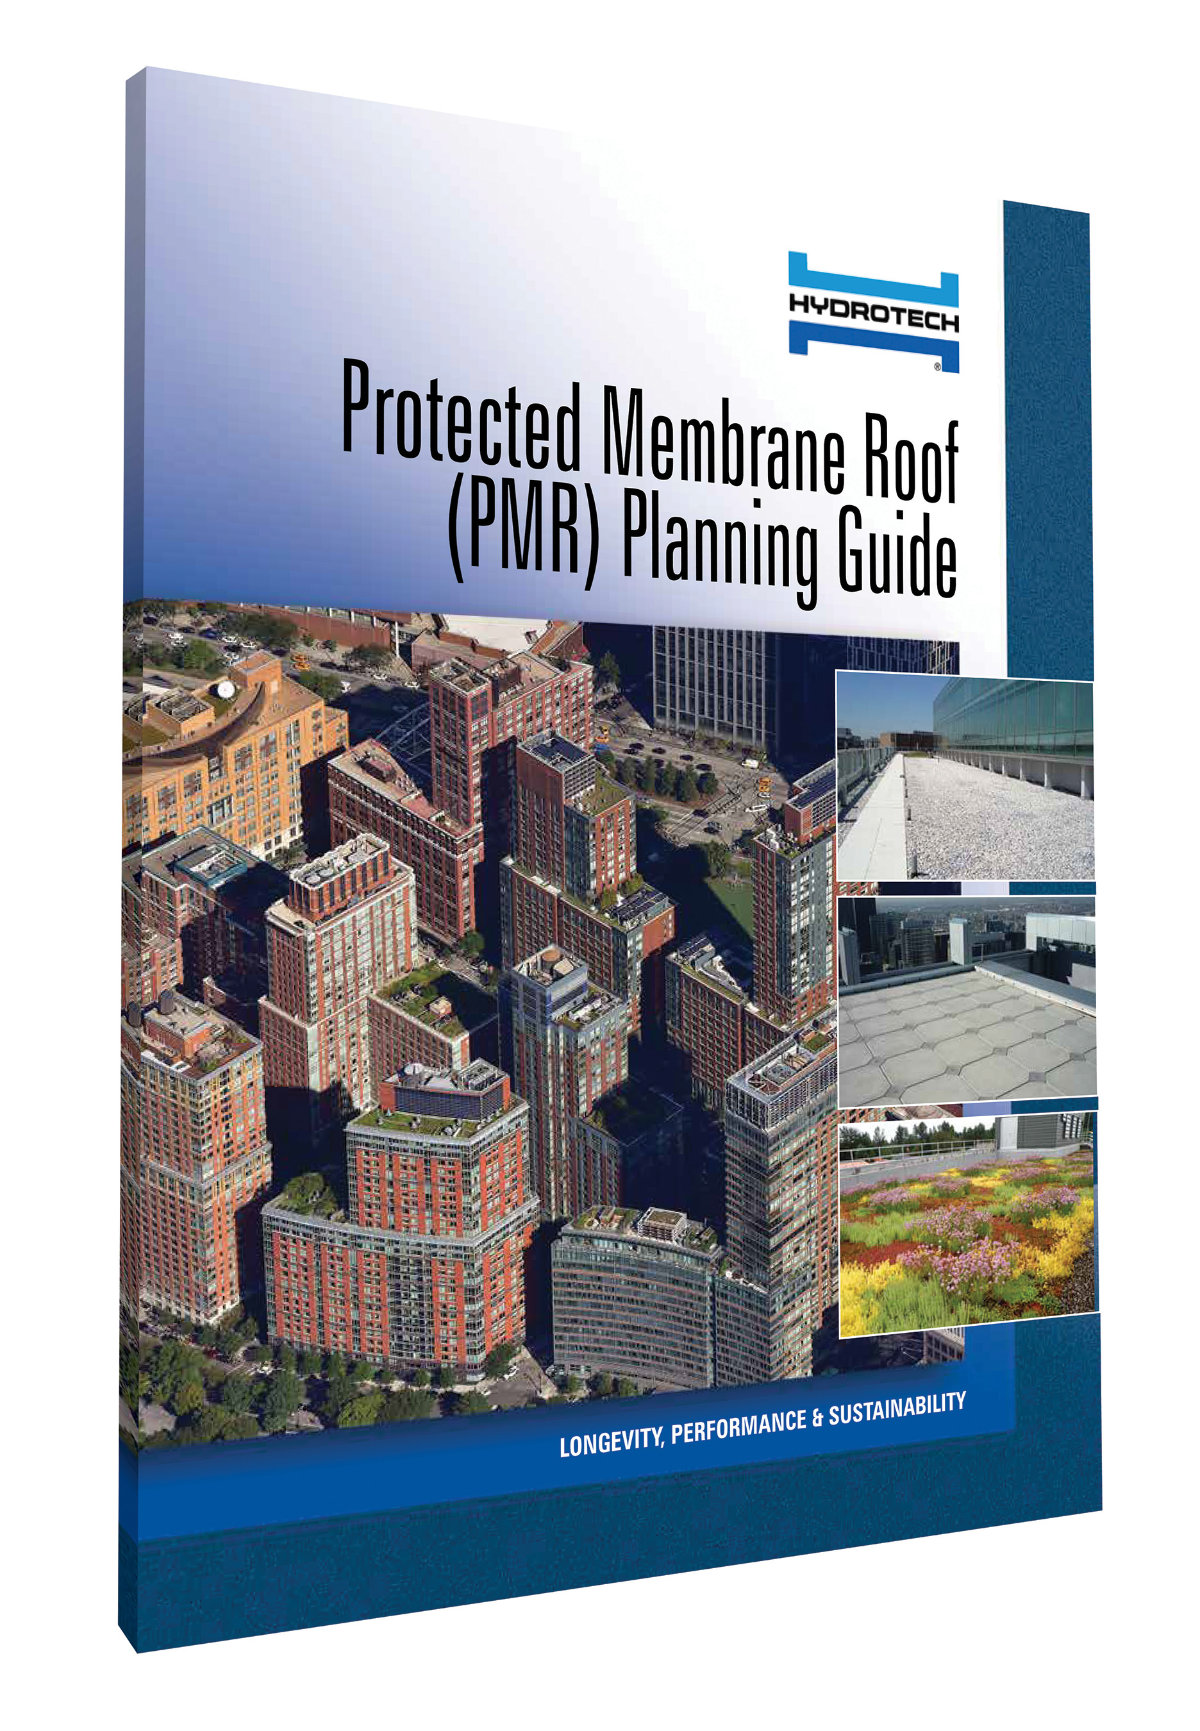 Protected Membrane Roof Planning Guide